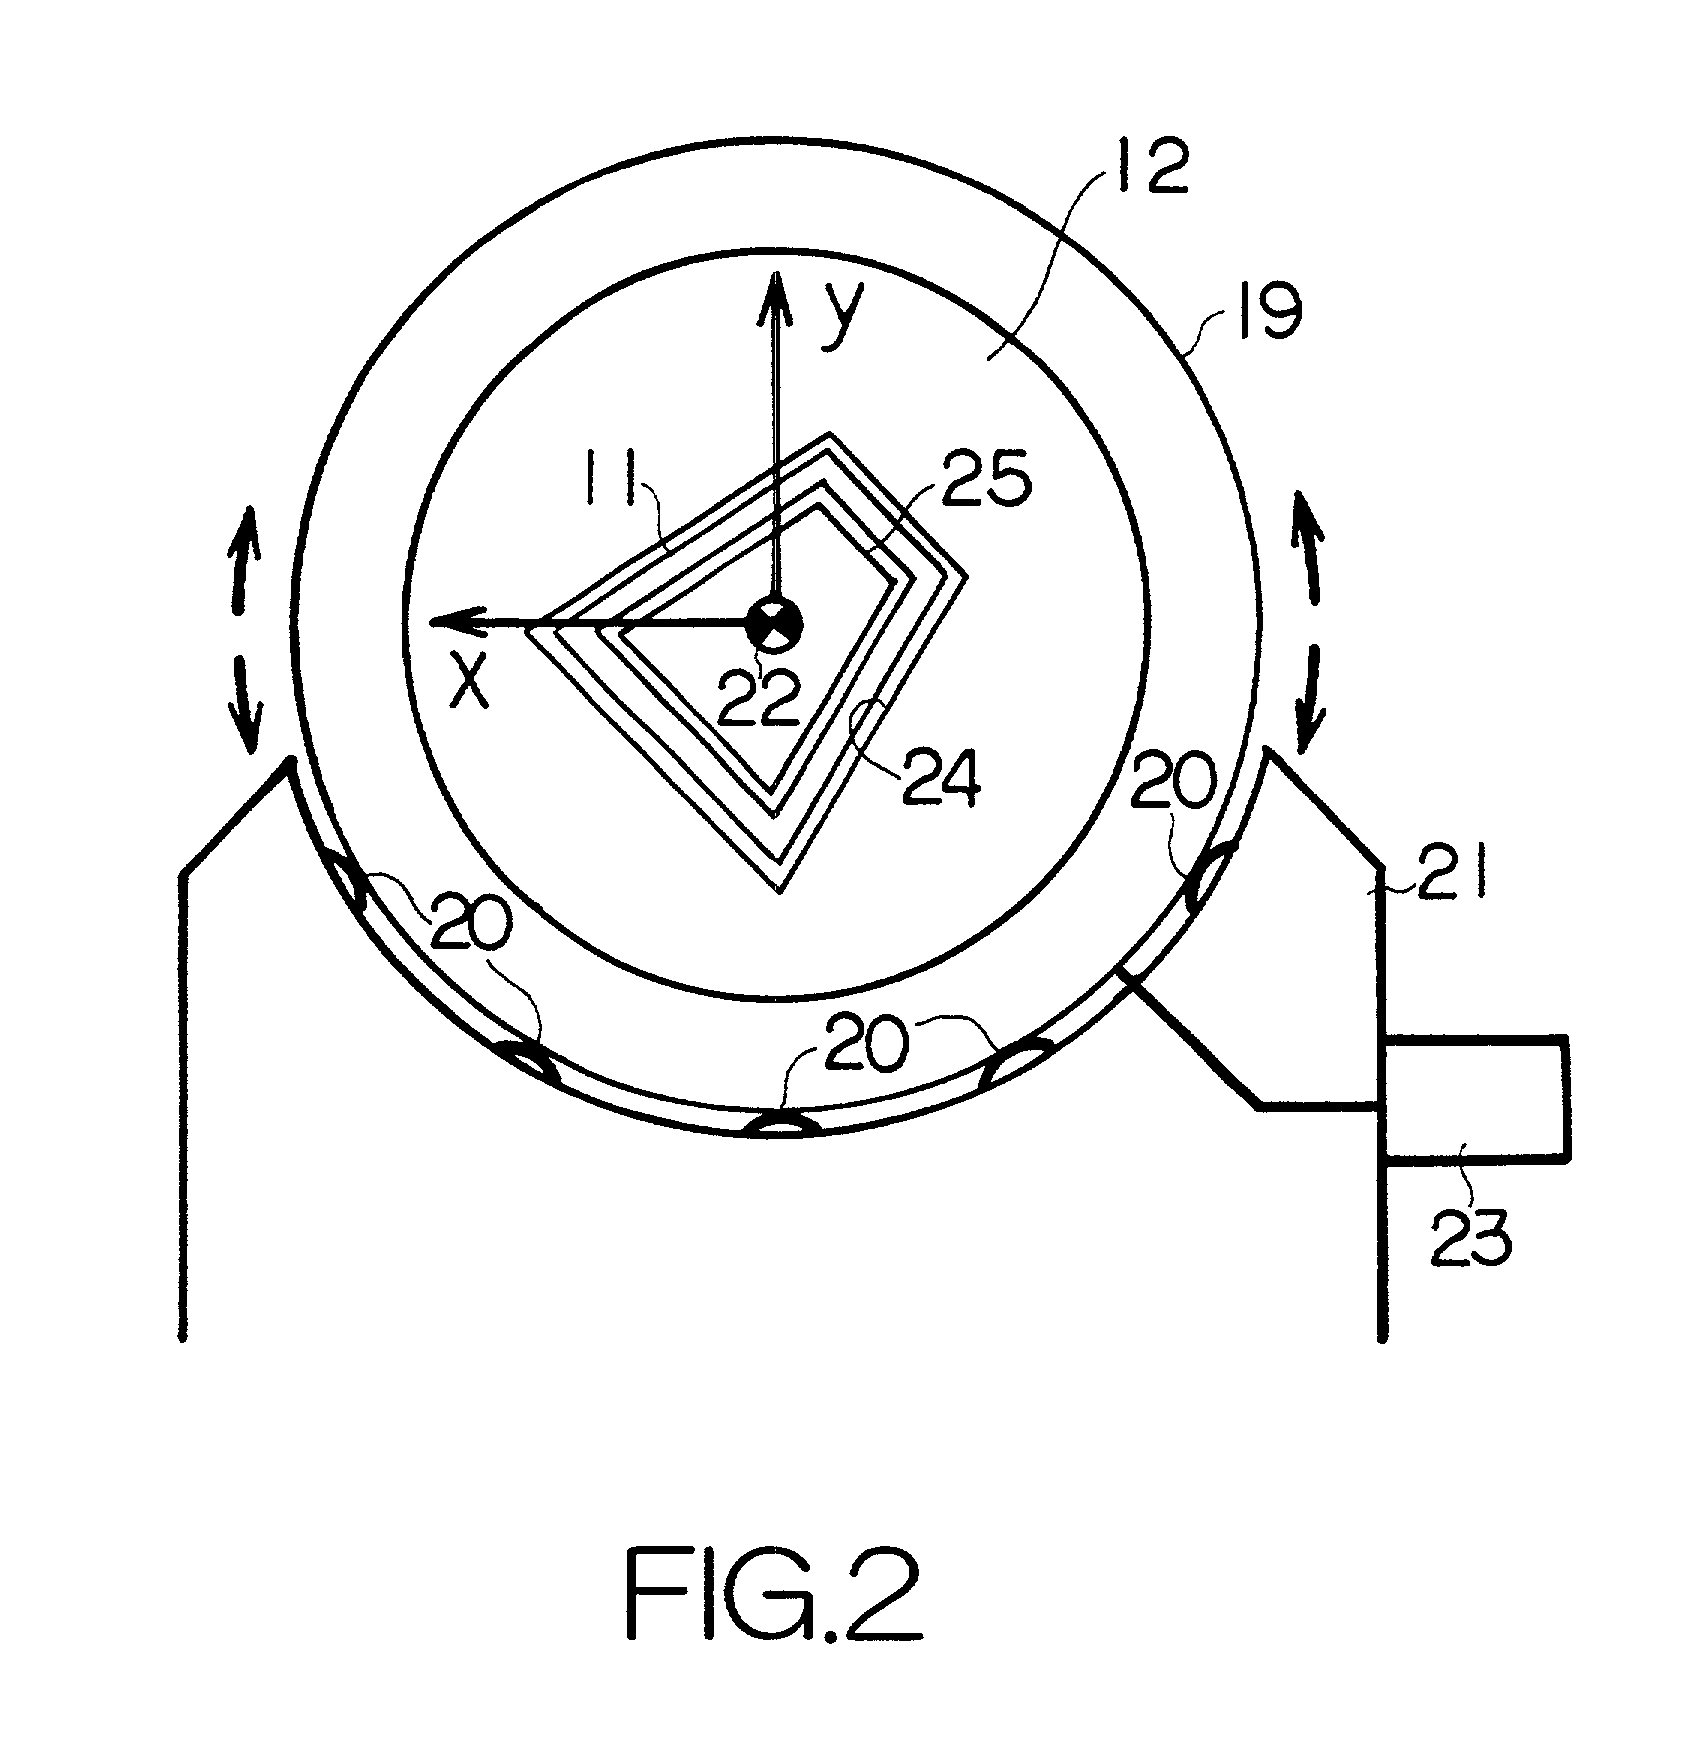 Method of generating control data for bending and torsion apparatuses